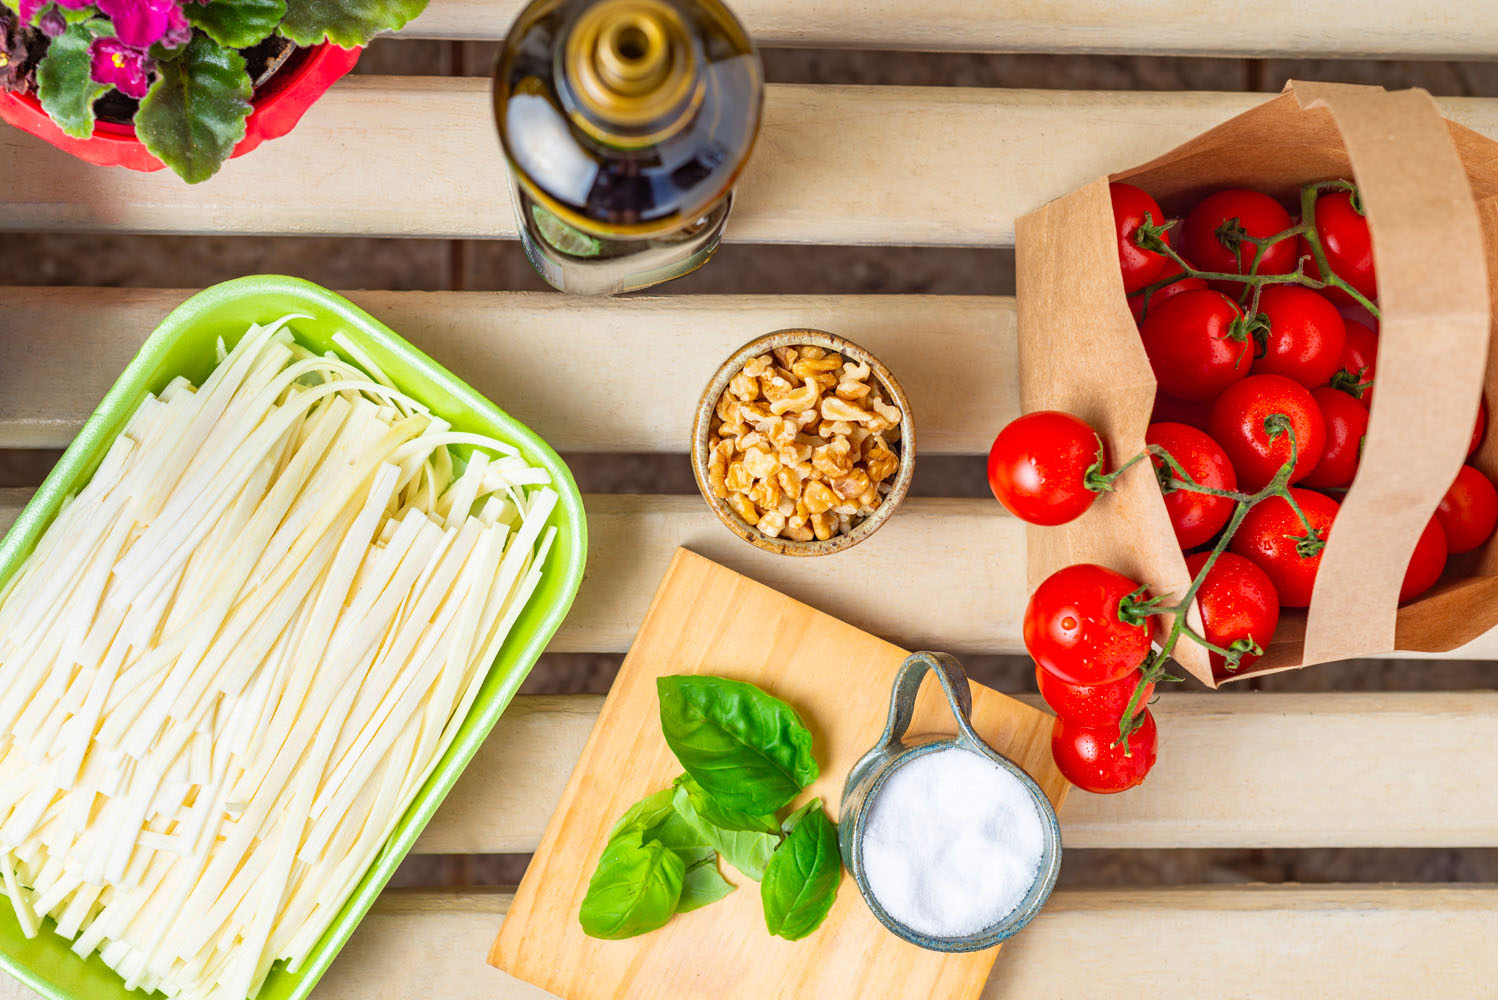 ingredients to make hearts of palm spaghetti with tomato